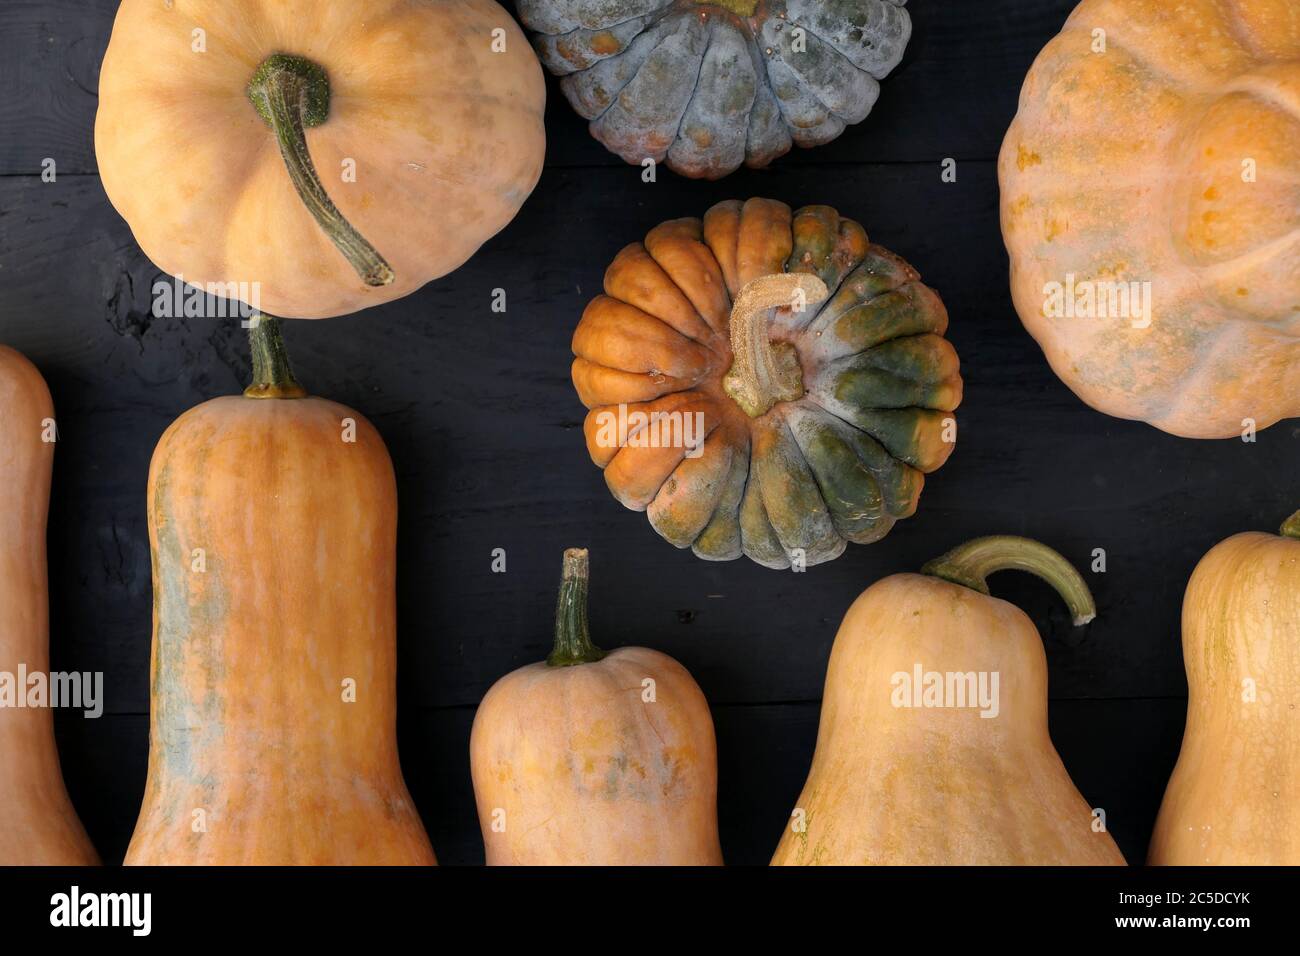 Butternut and moschata squashes varieties on black wooden boards background Stock Photo